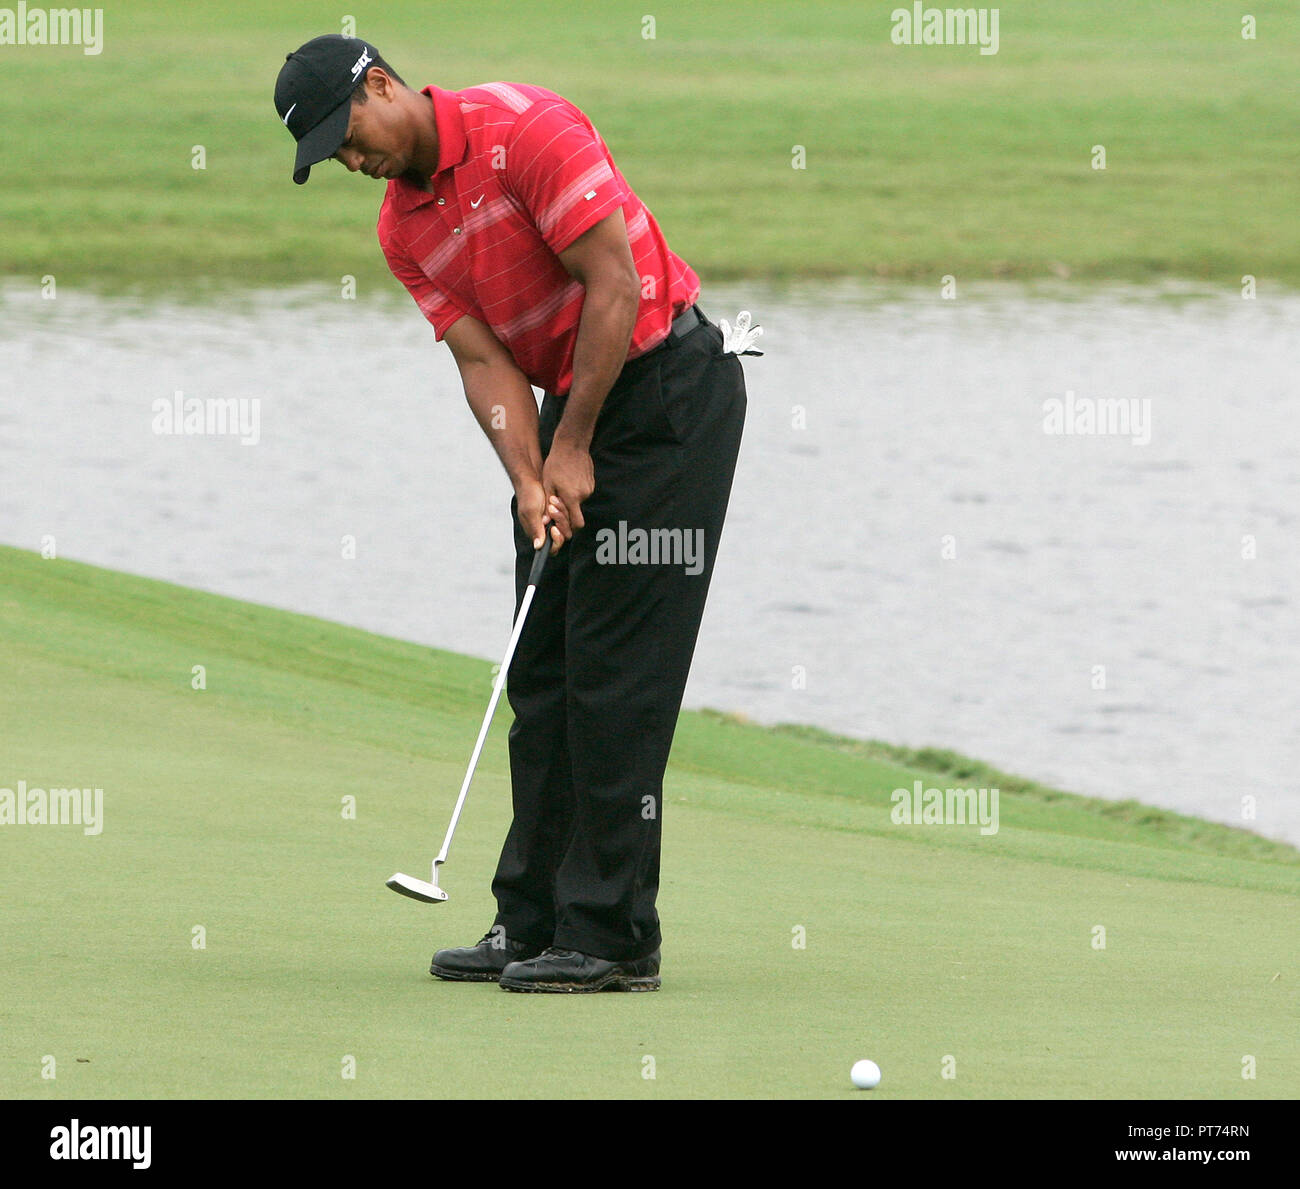 Tiger Woods putts on the 18th green during the final round of the World Golf Championships - CA Championship at Doral Resort and Spa in Doral, Florida on March 24, 2008. Stock Photo